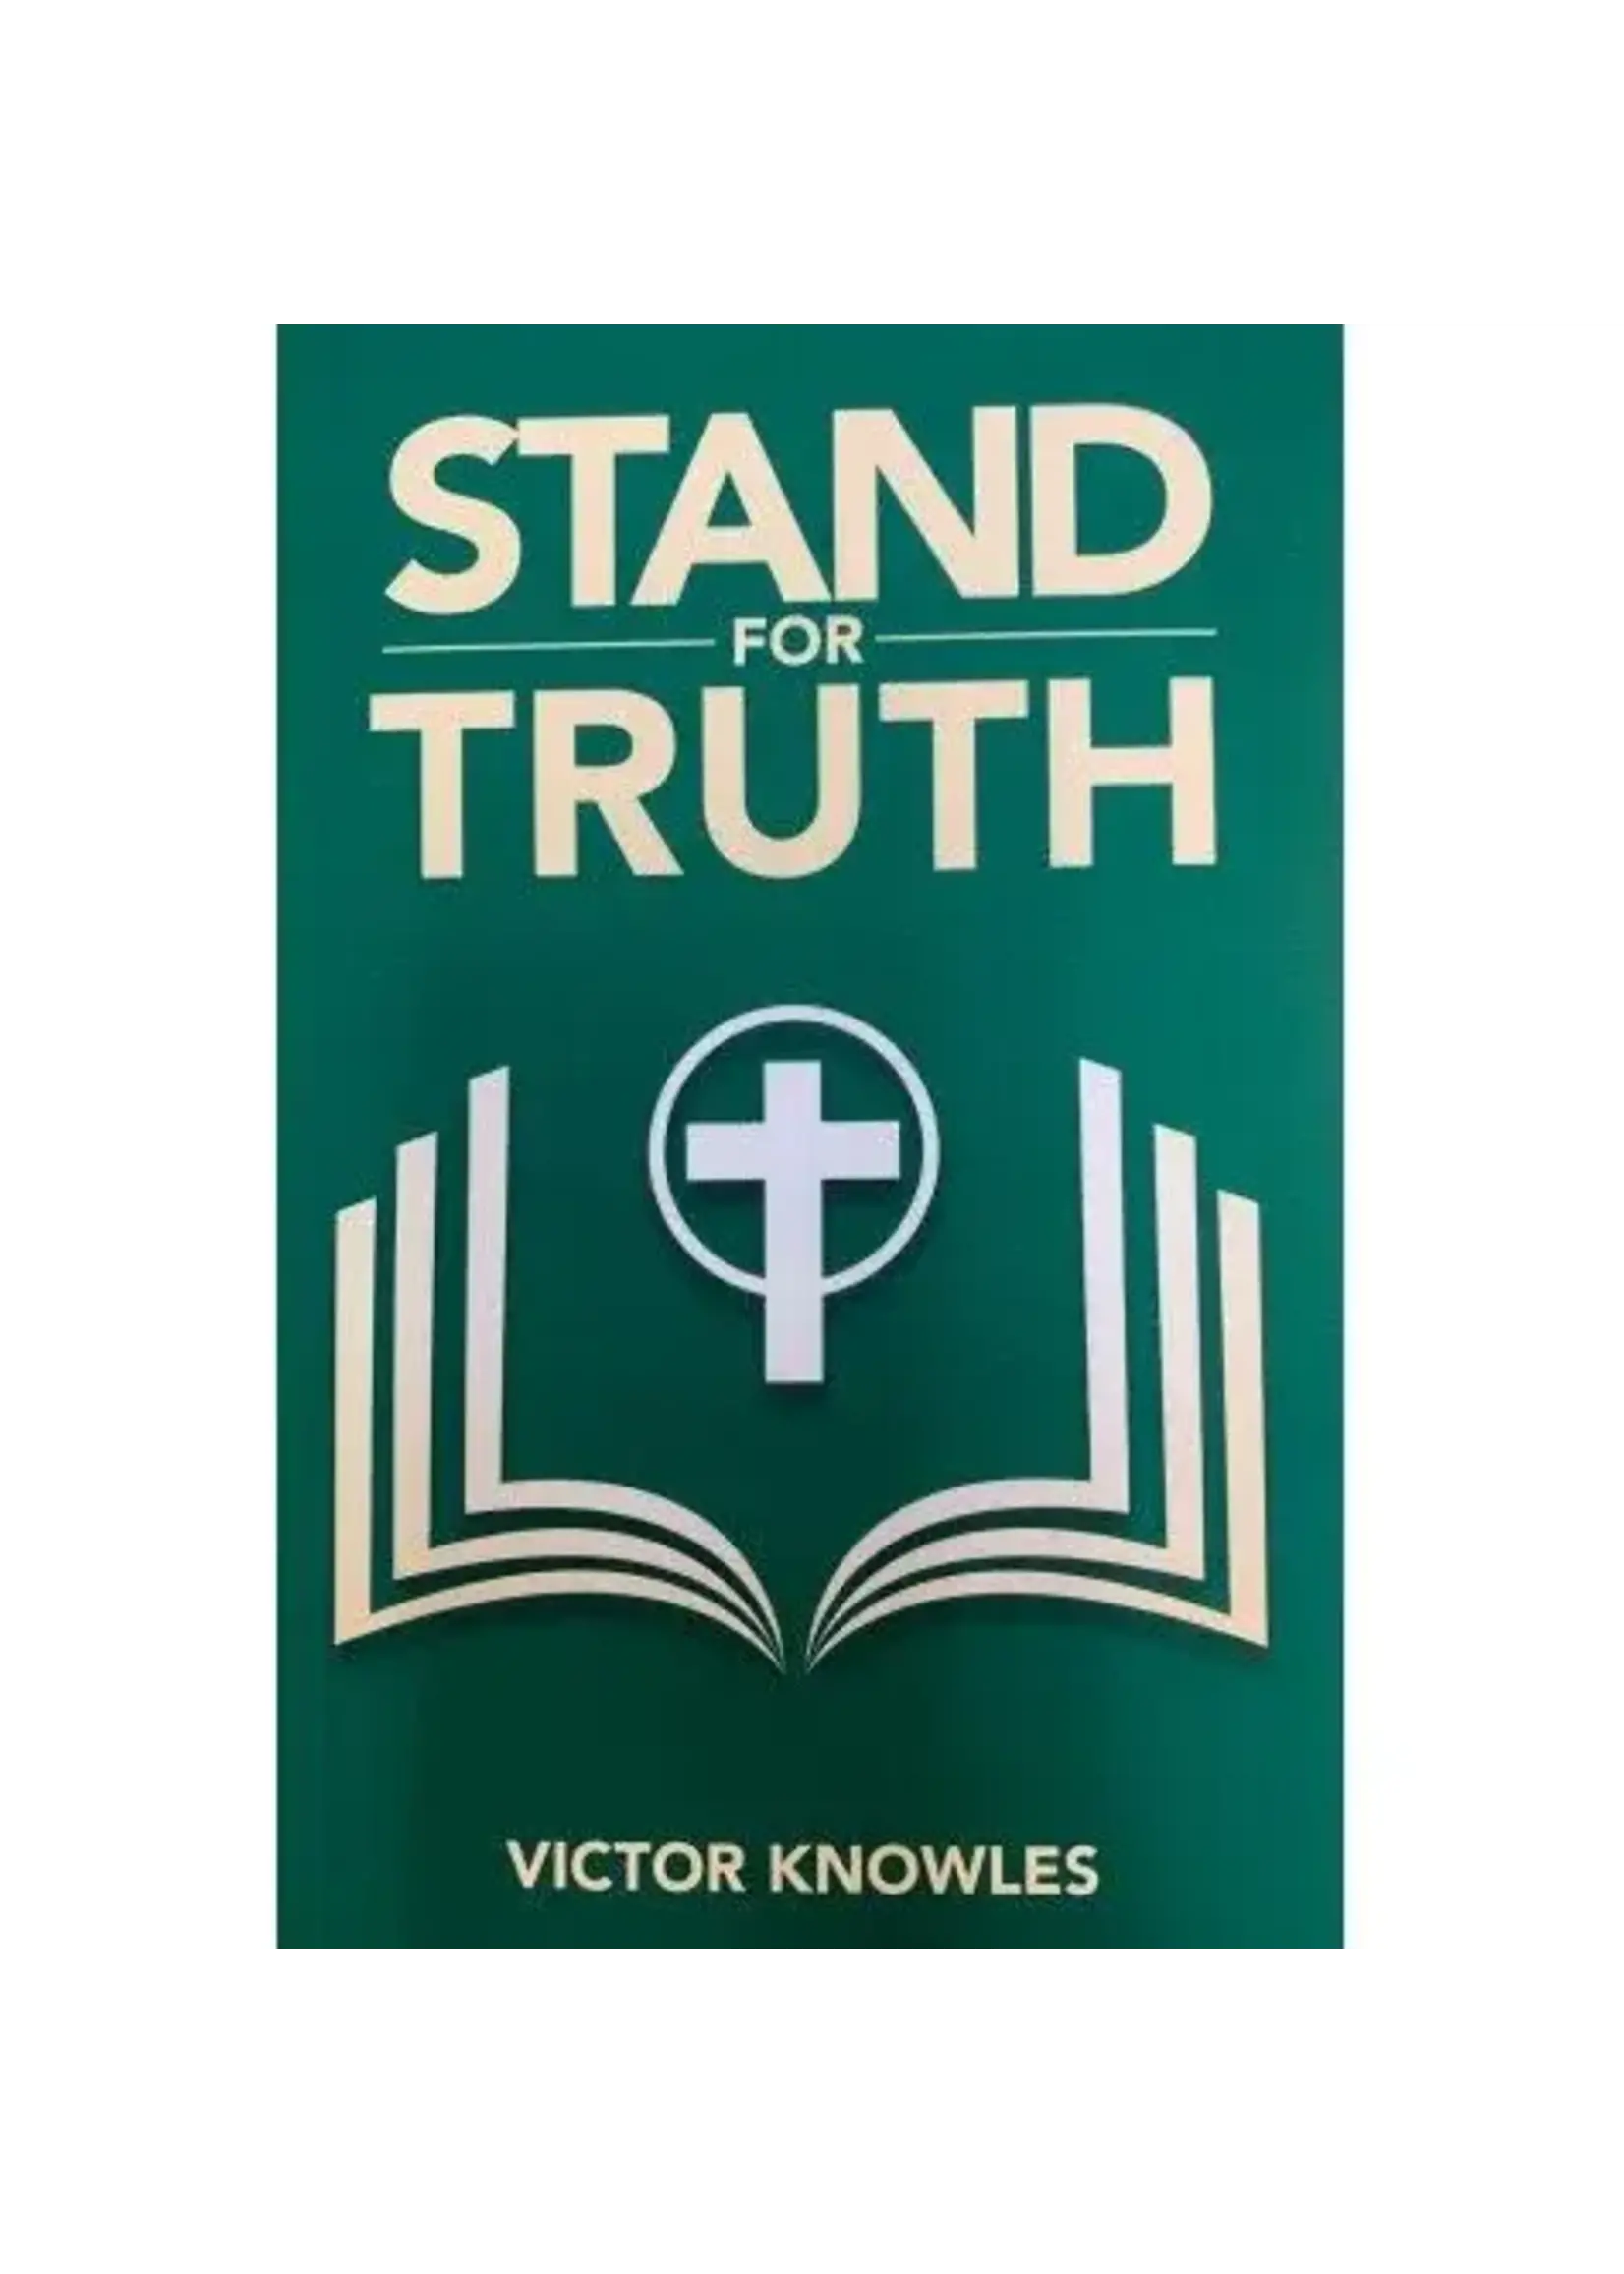 STAND FOR TRUTH